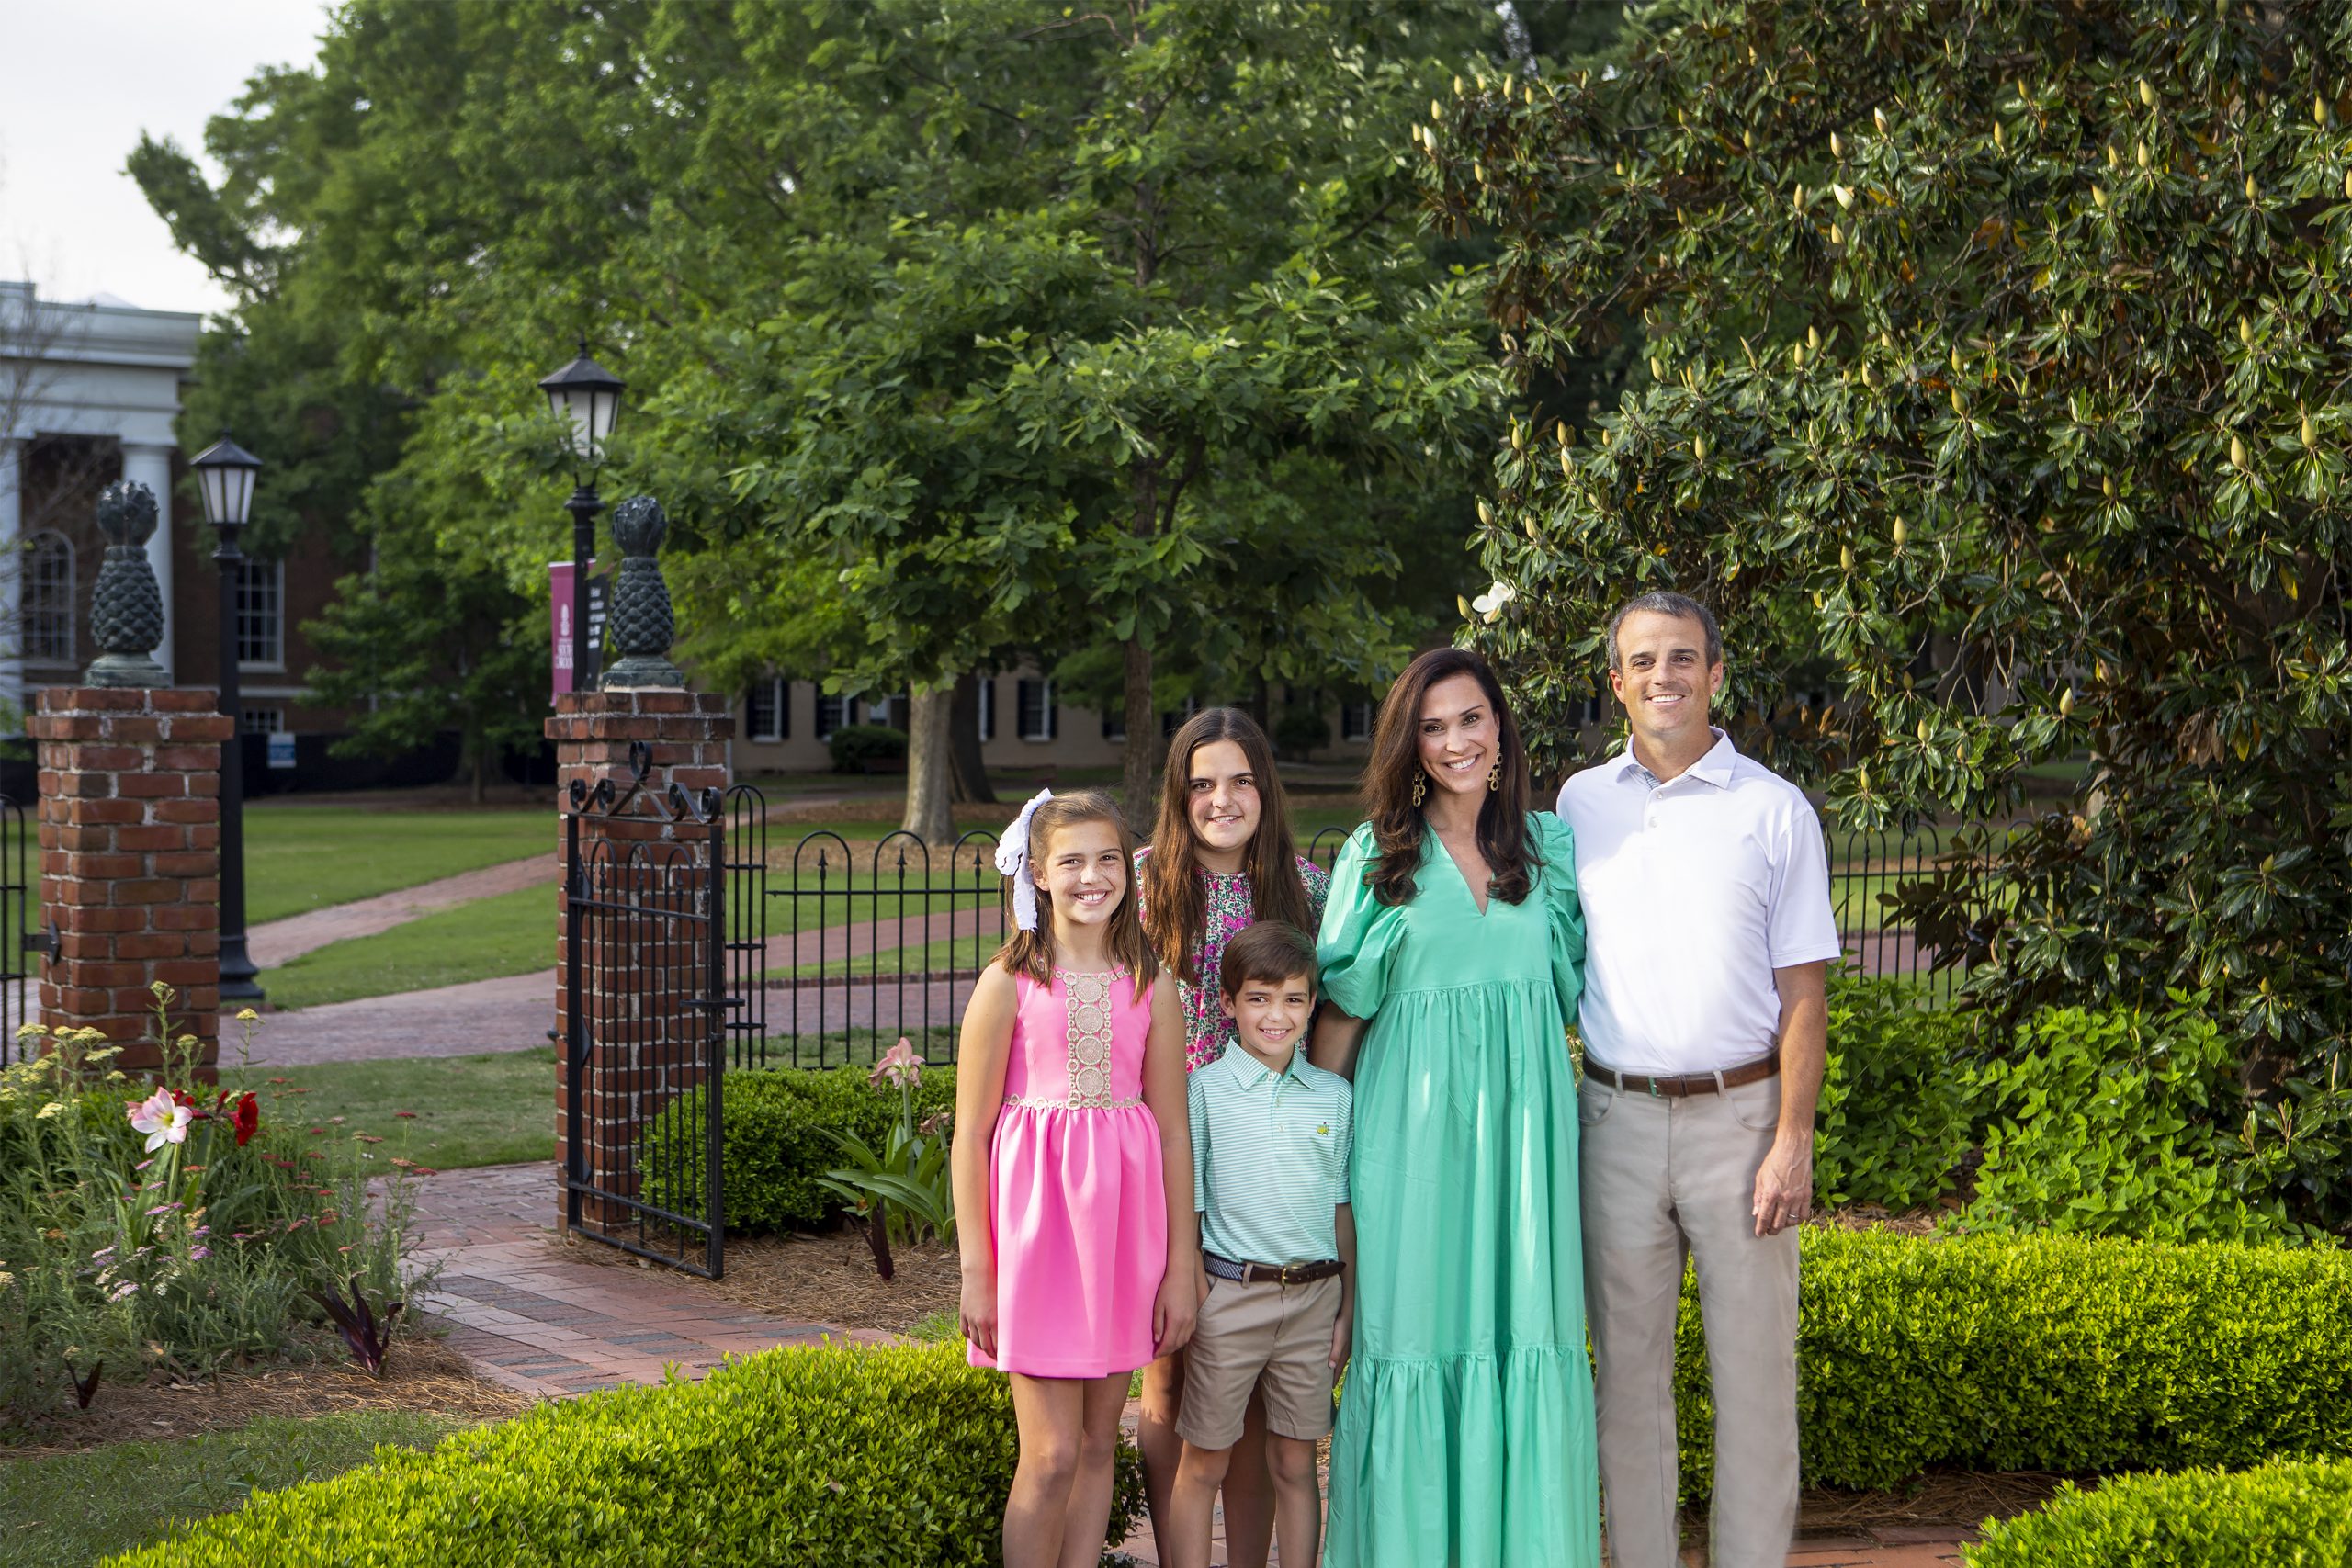 The Beamers never felt completely uprooted from South Carolina. When Shane was named the new head coach at the University of South Carolina, they found themselves returning to raise their children in a city they truly love. Olivia, Sutton, and Hunter with Emily and Shane.